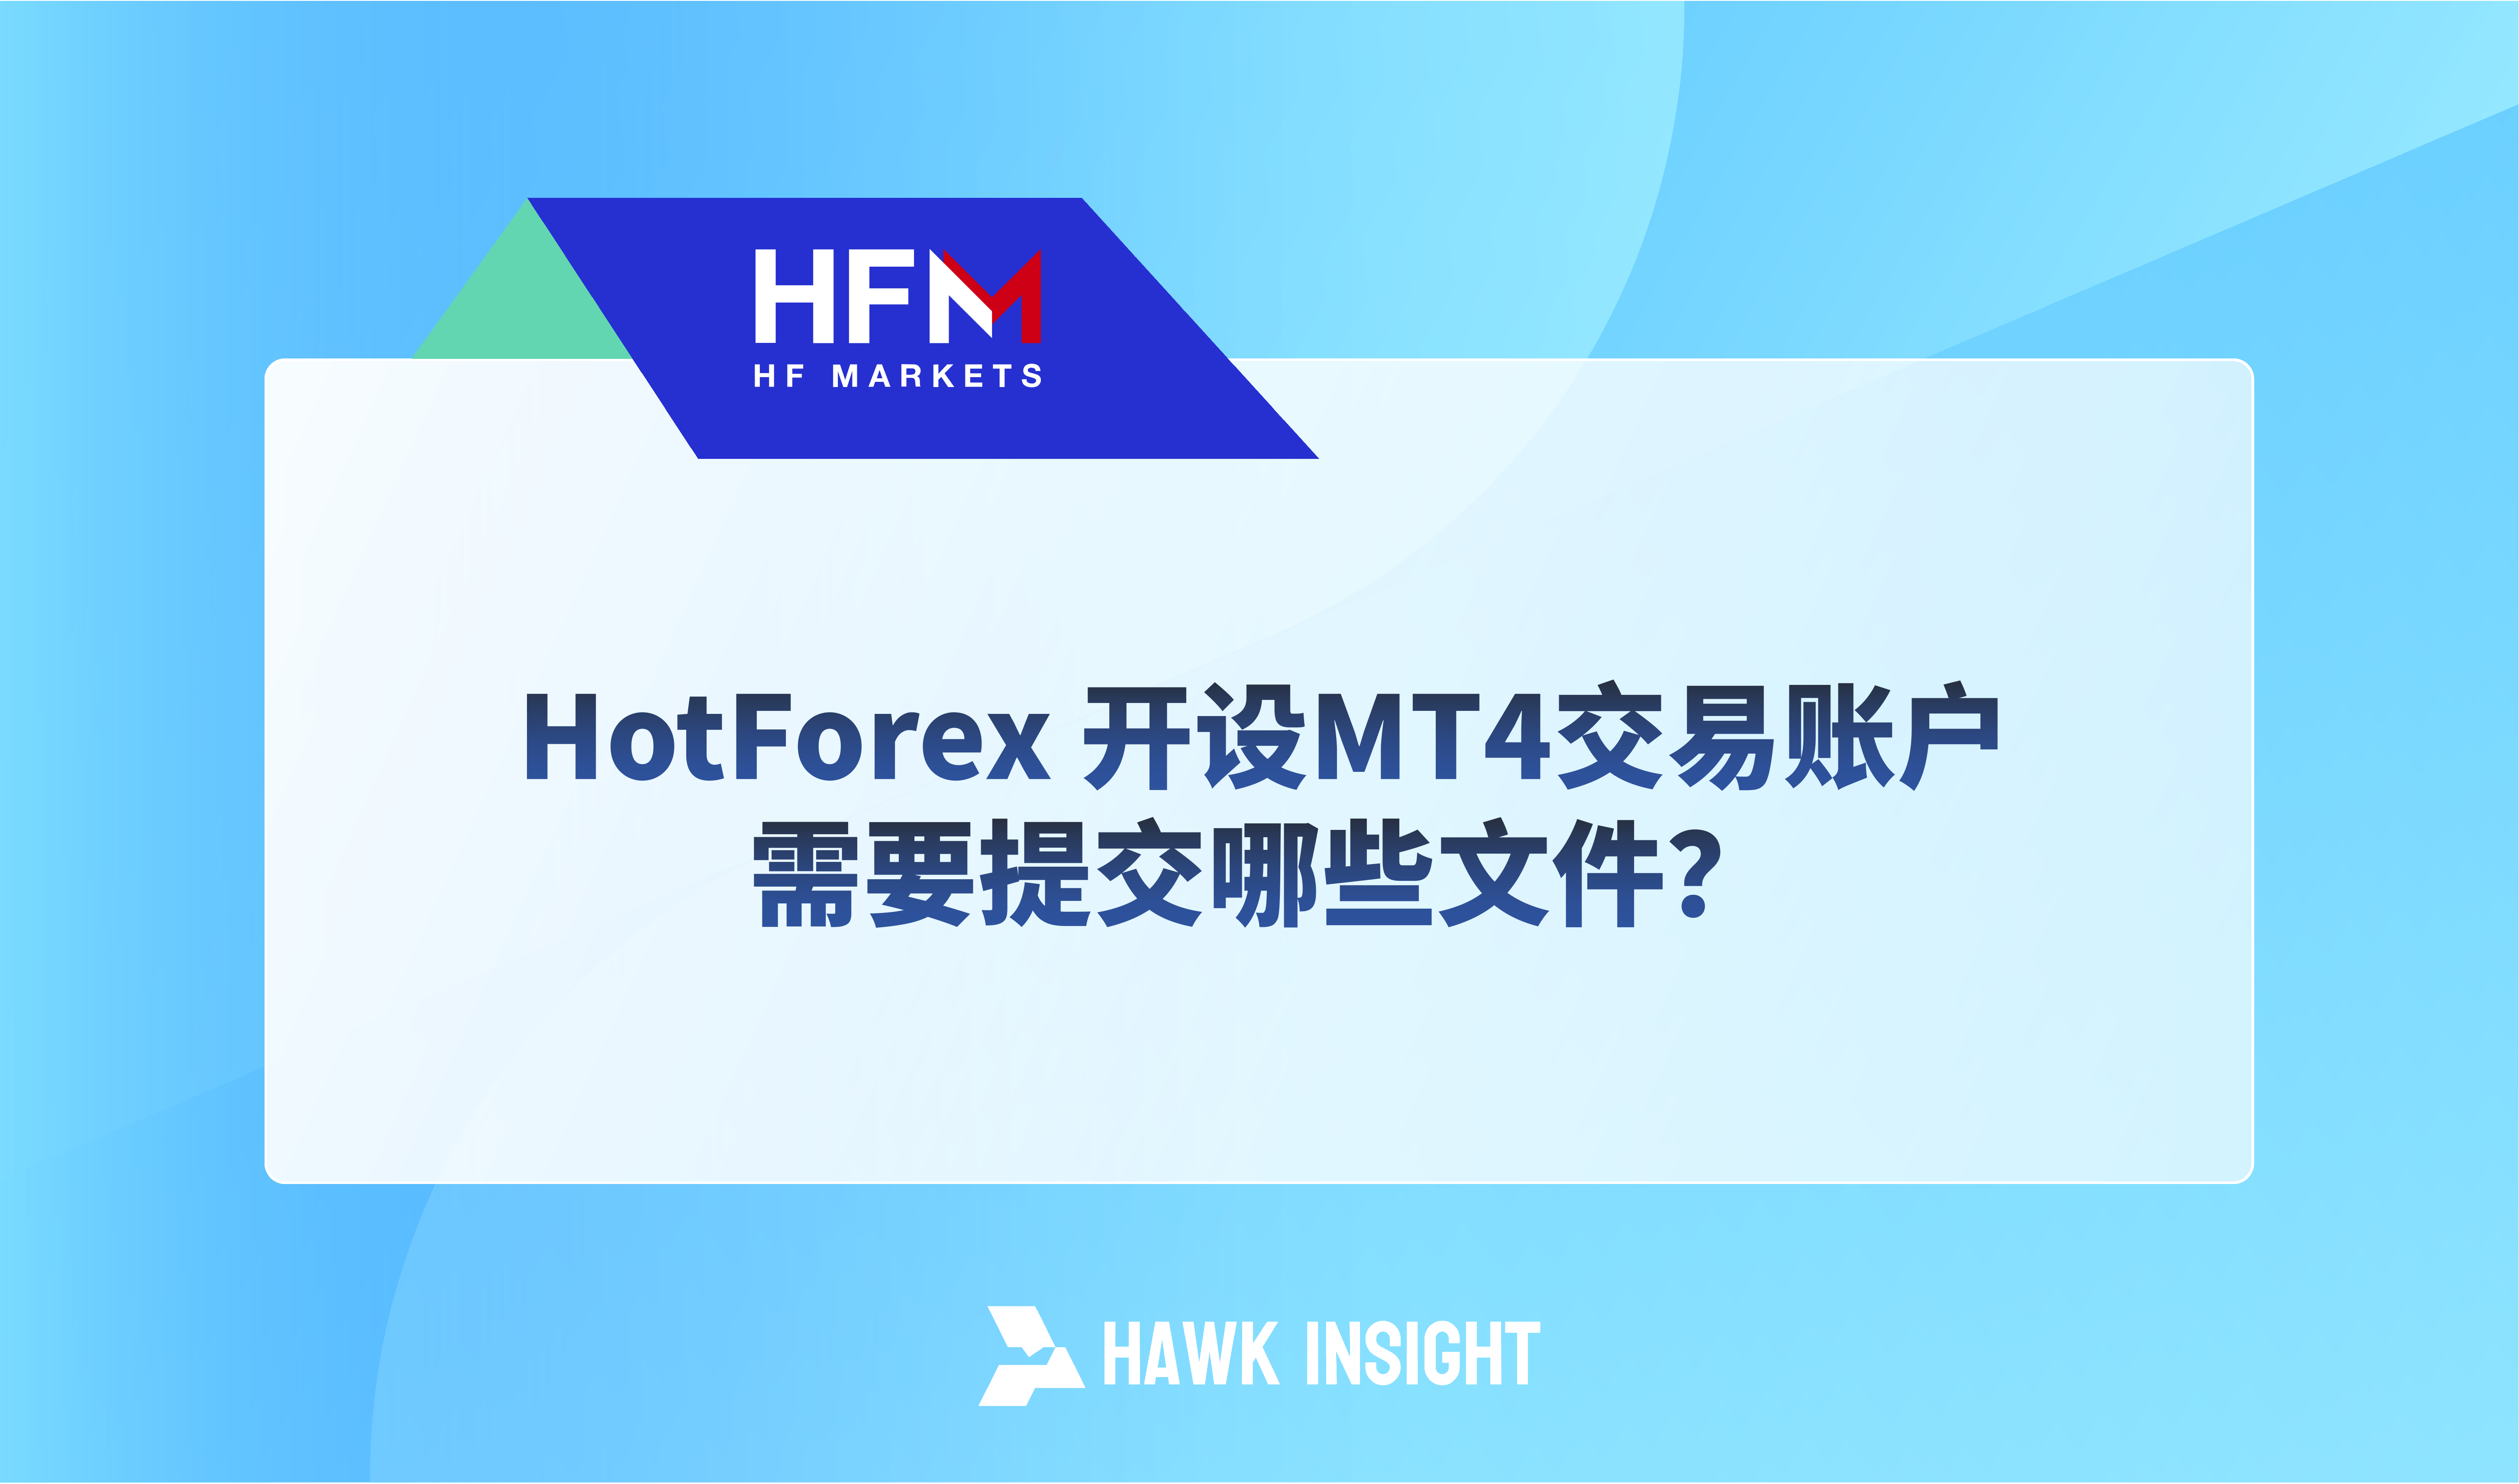 What documents do HotForex need to submit to open an MT4 trading account？